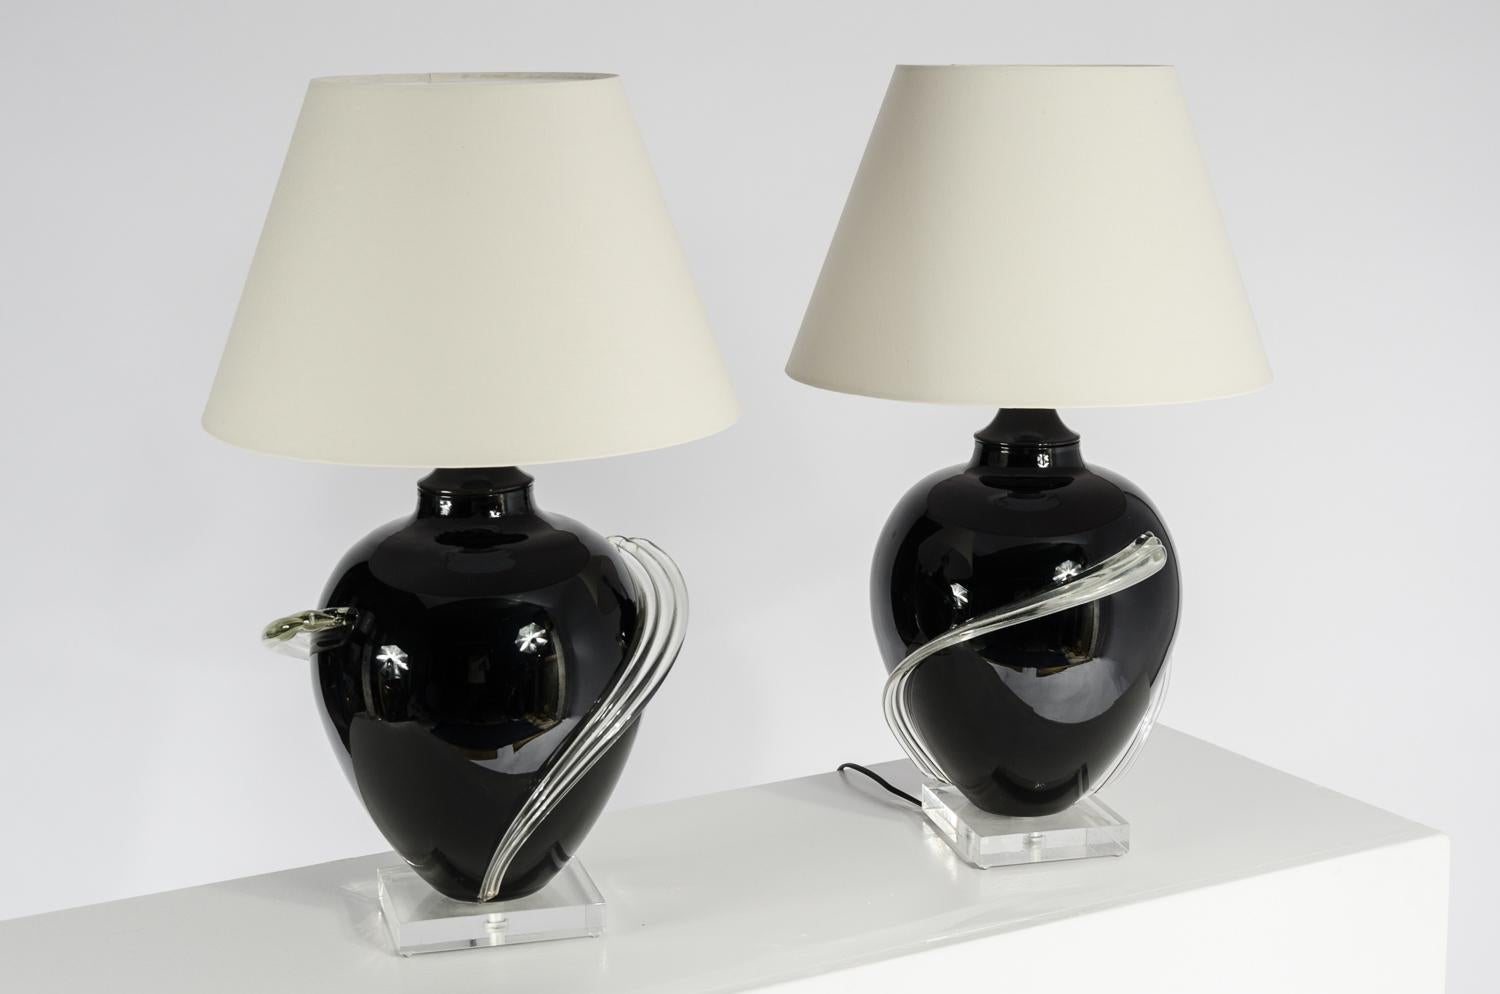 Pair of Murano glass and lucite Table Lamps, circa 1980s. New rewired. The lamps are sold without the shades.